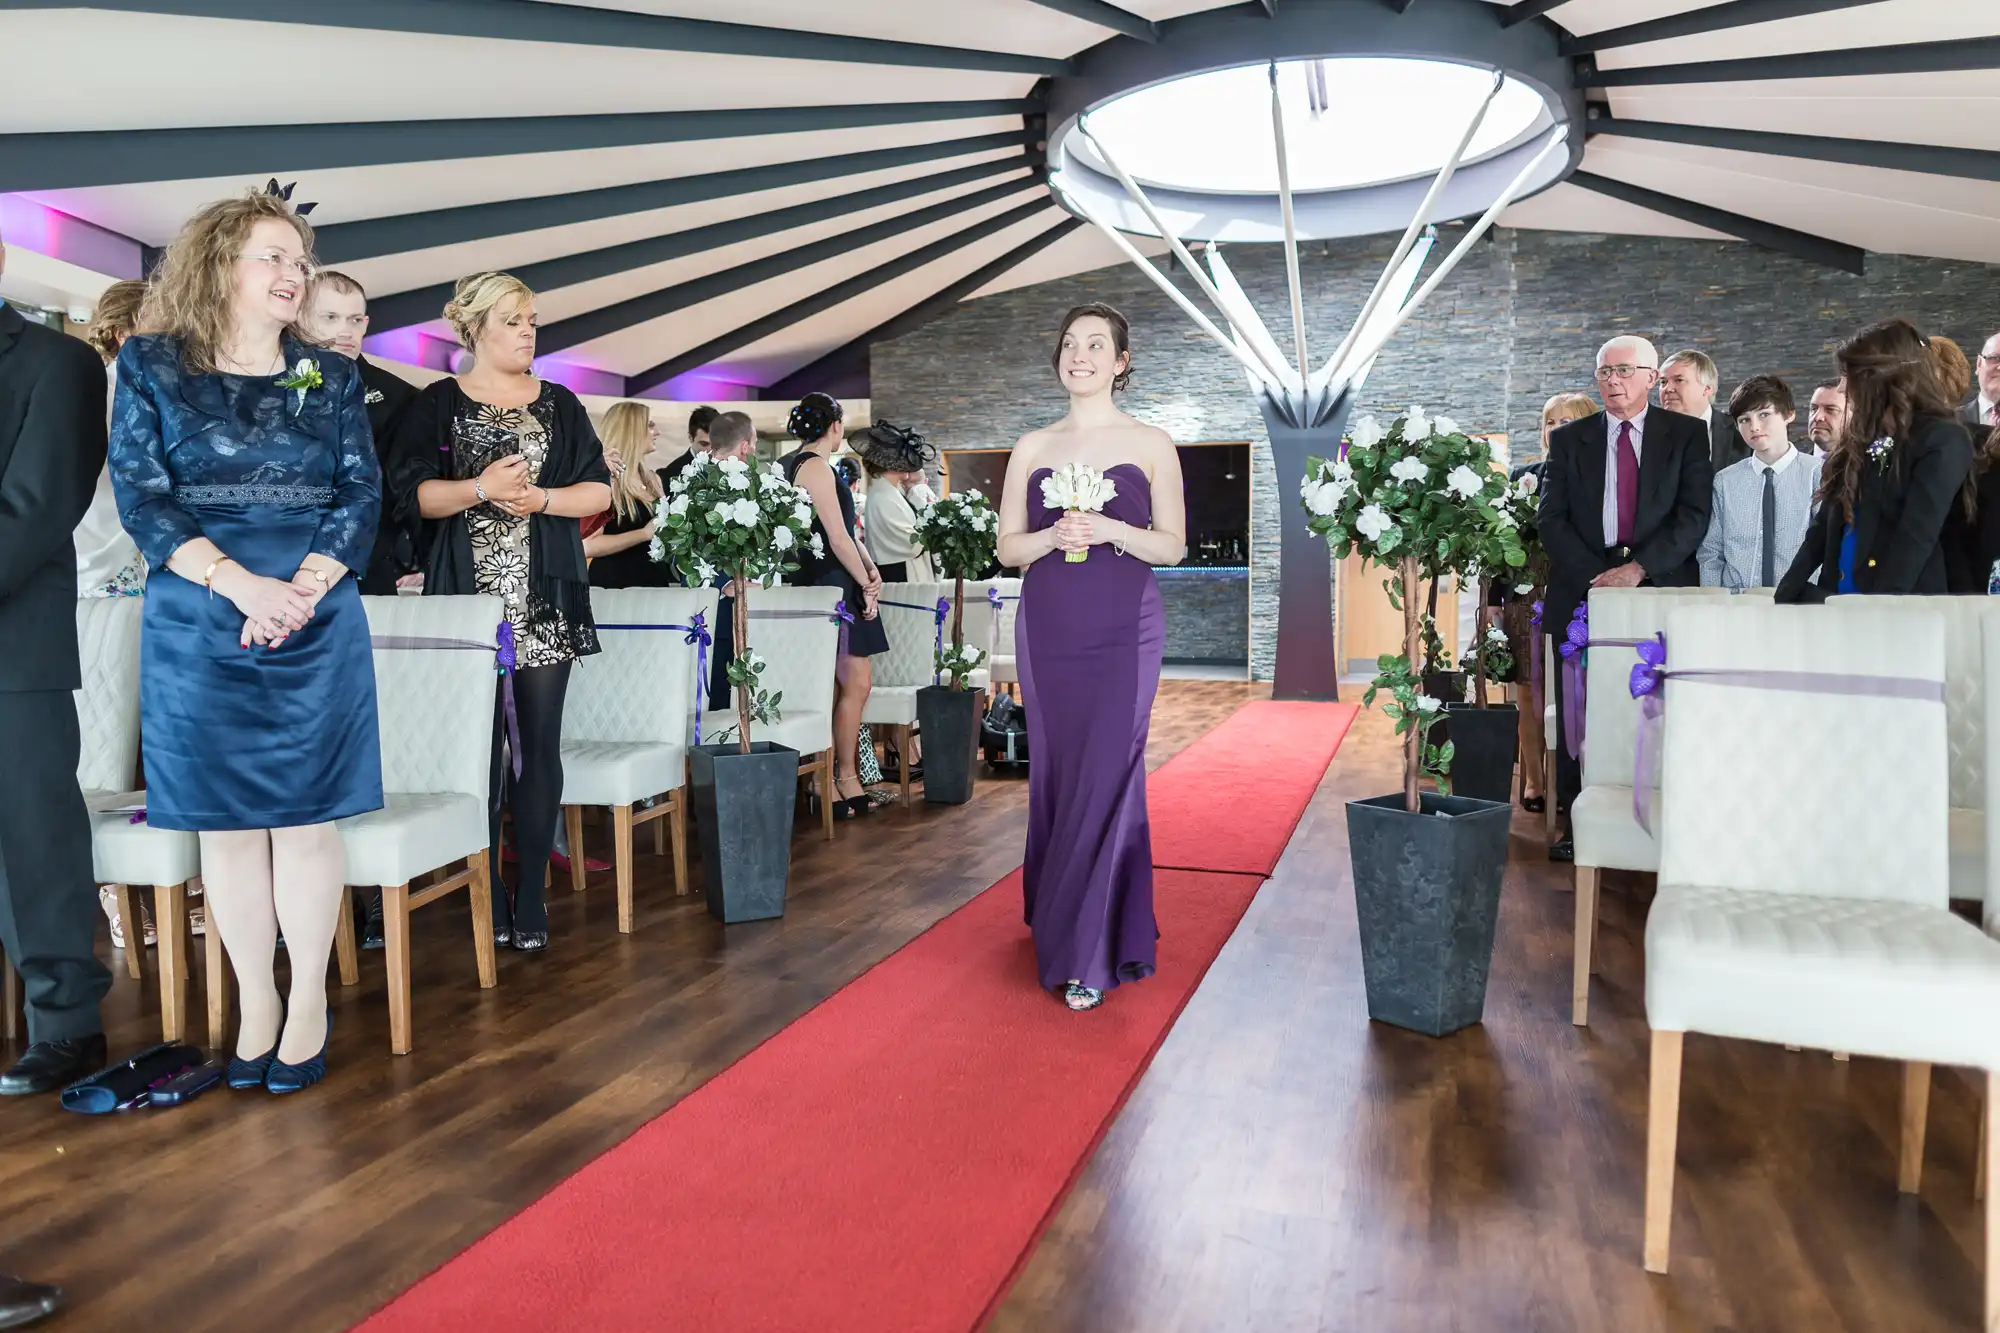 A woman in a purple dress speaks at a wedding ceremony inside a modern venue with guests standing and sitting around her.